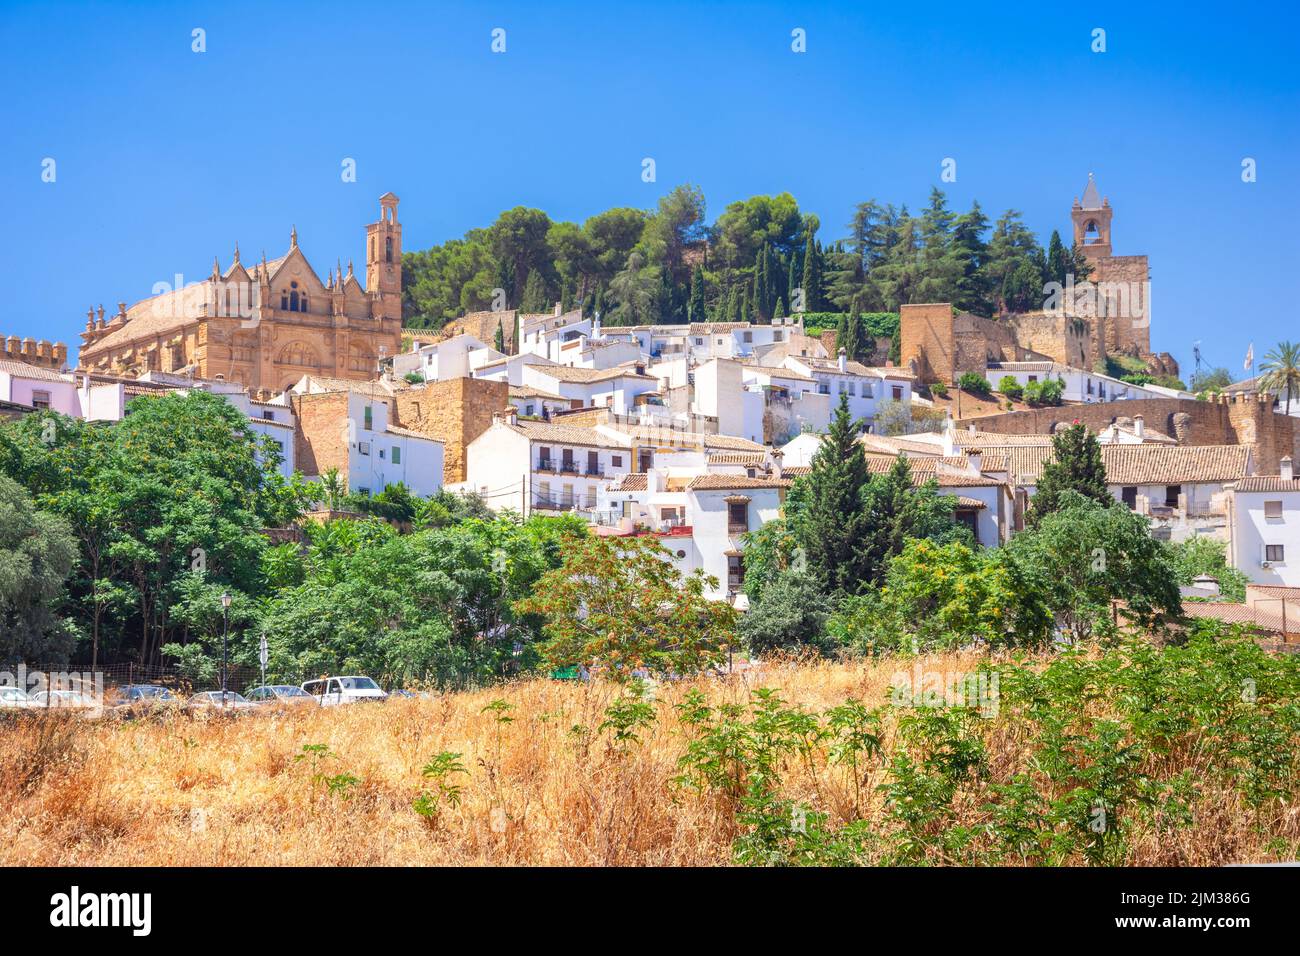 City of Antequera. Malaga Well of cultural interest by UNESCO, Spain. Stock Photo